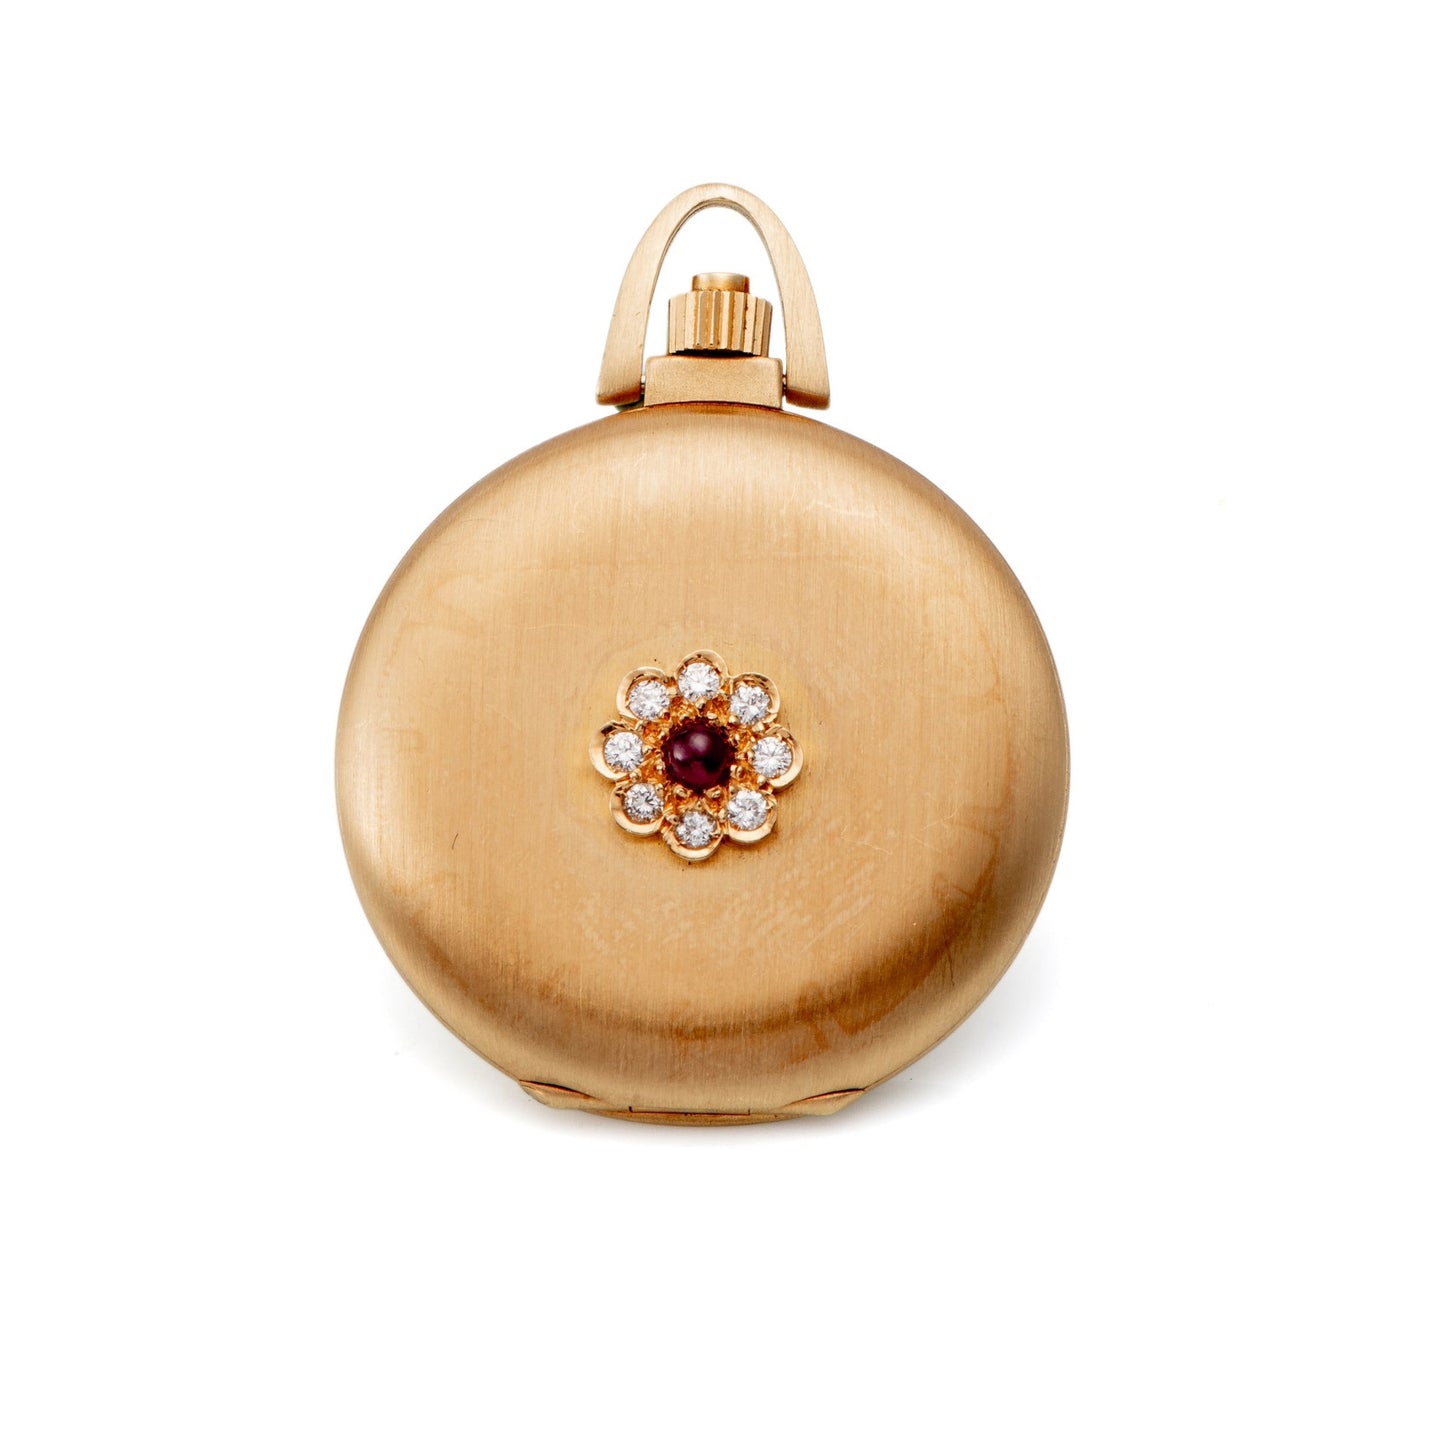 Chopard 18k Gold manual wind pendant watch with diamond and ruby